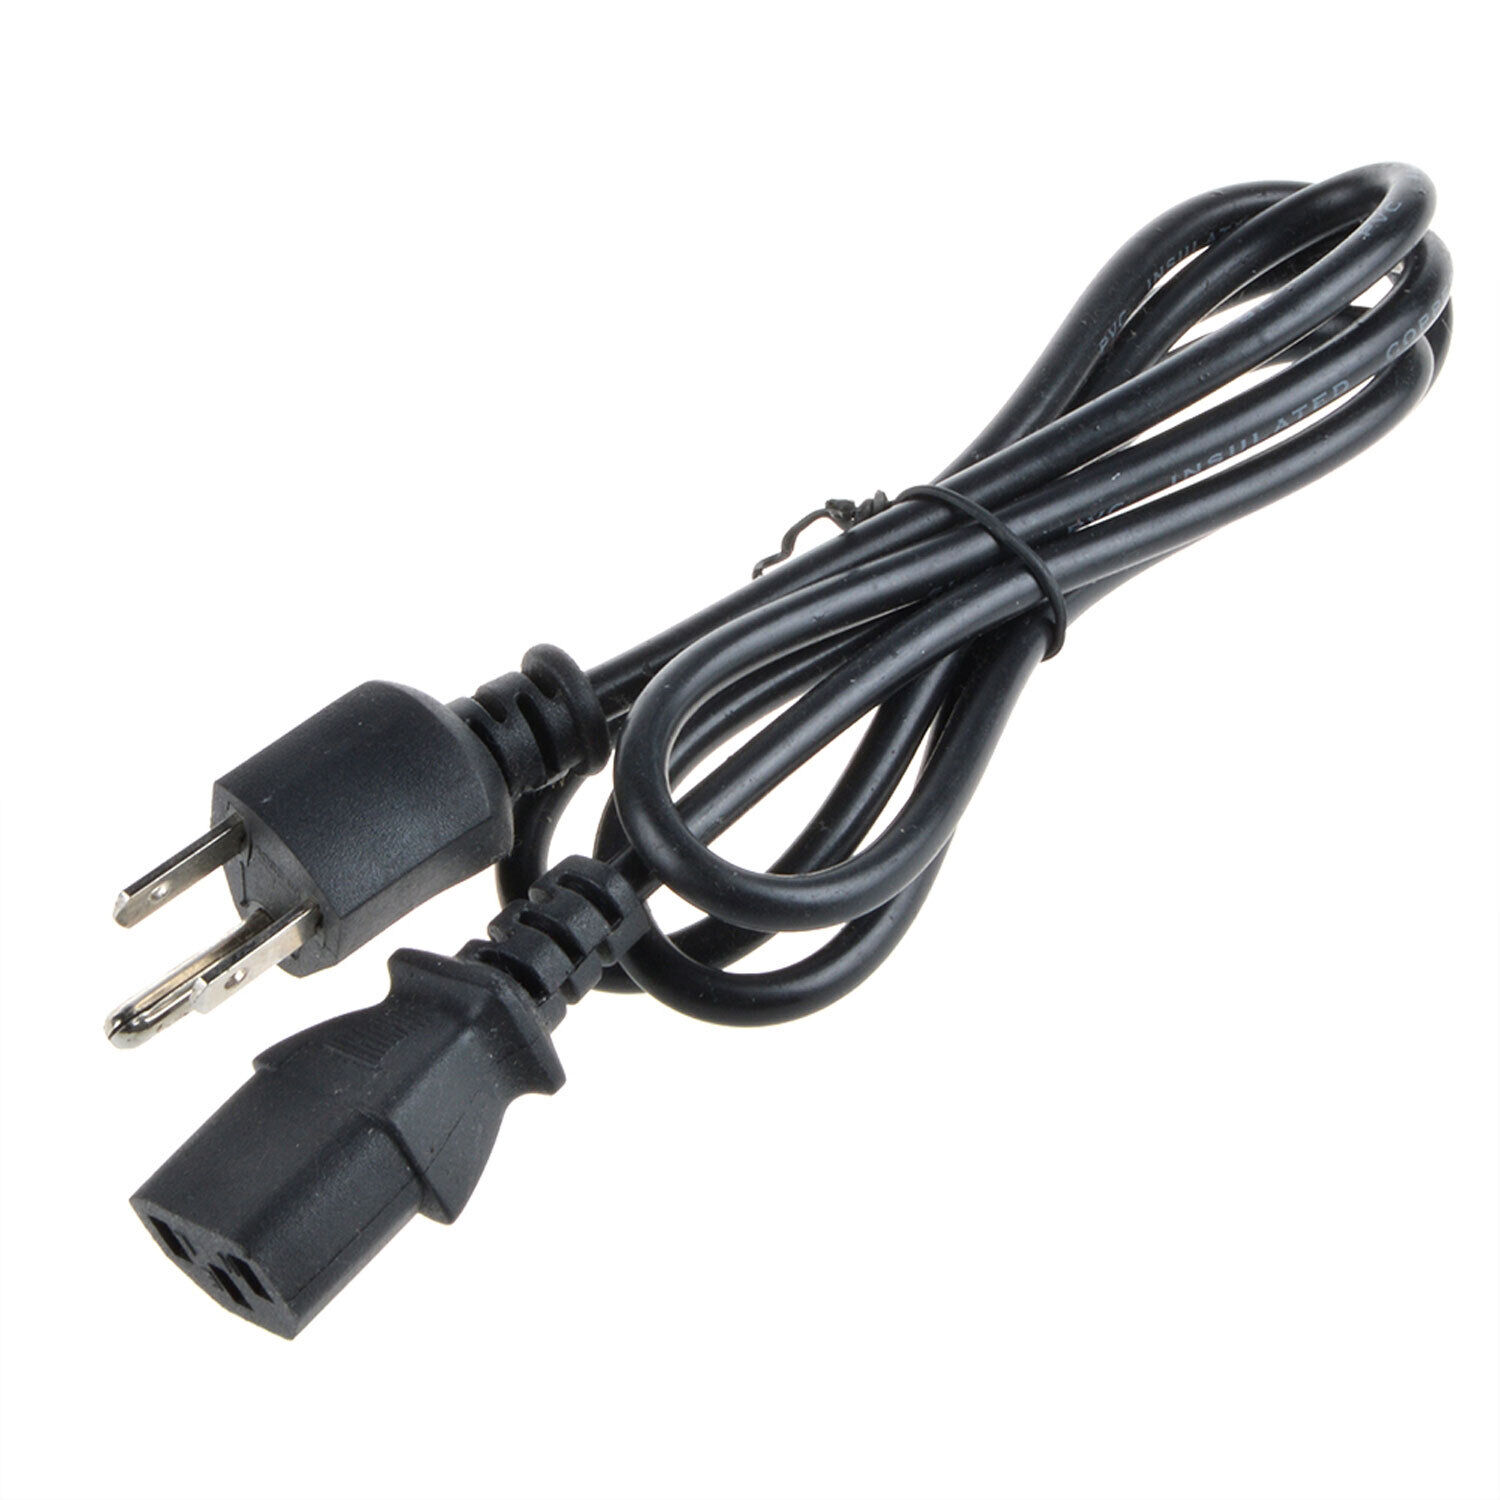 PwrON 5FT AC Power Cord Cable for Dell Precision 3650 t5820 tower workstation